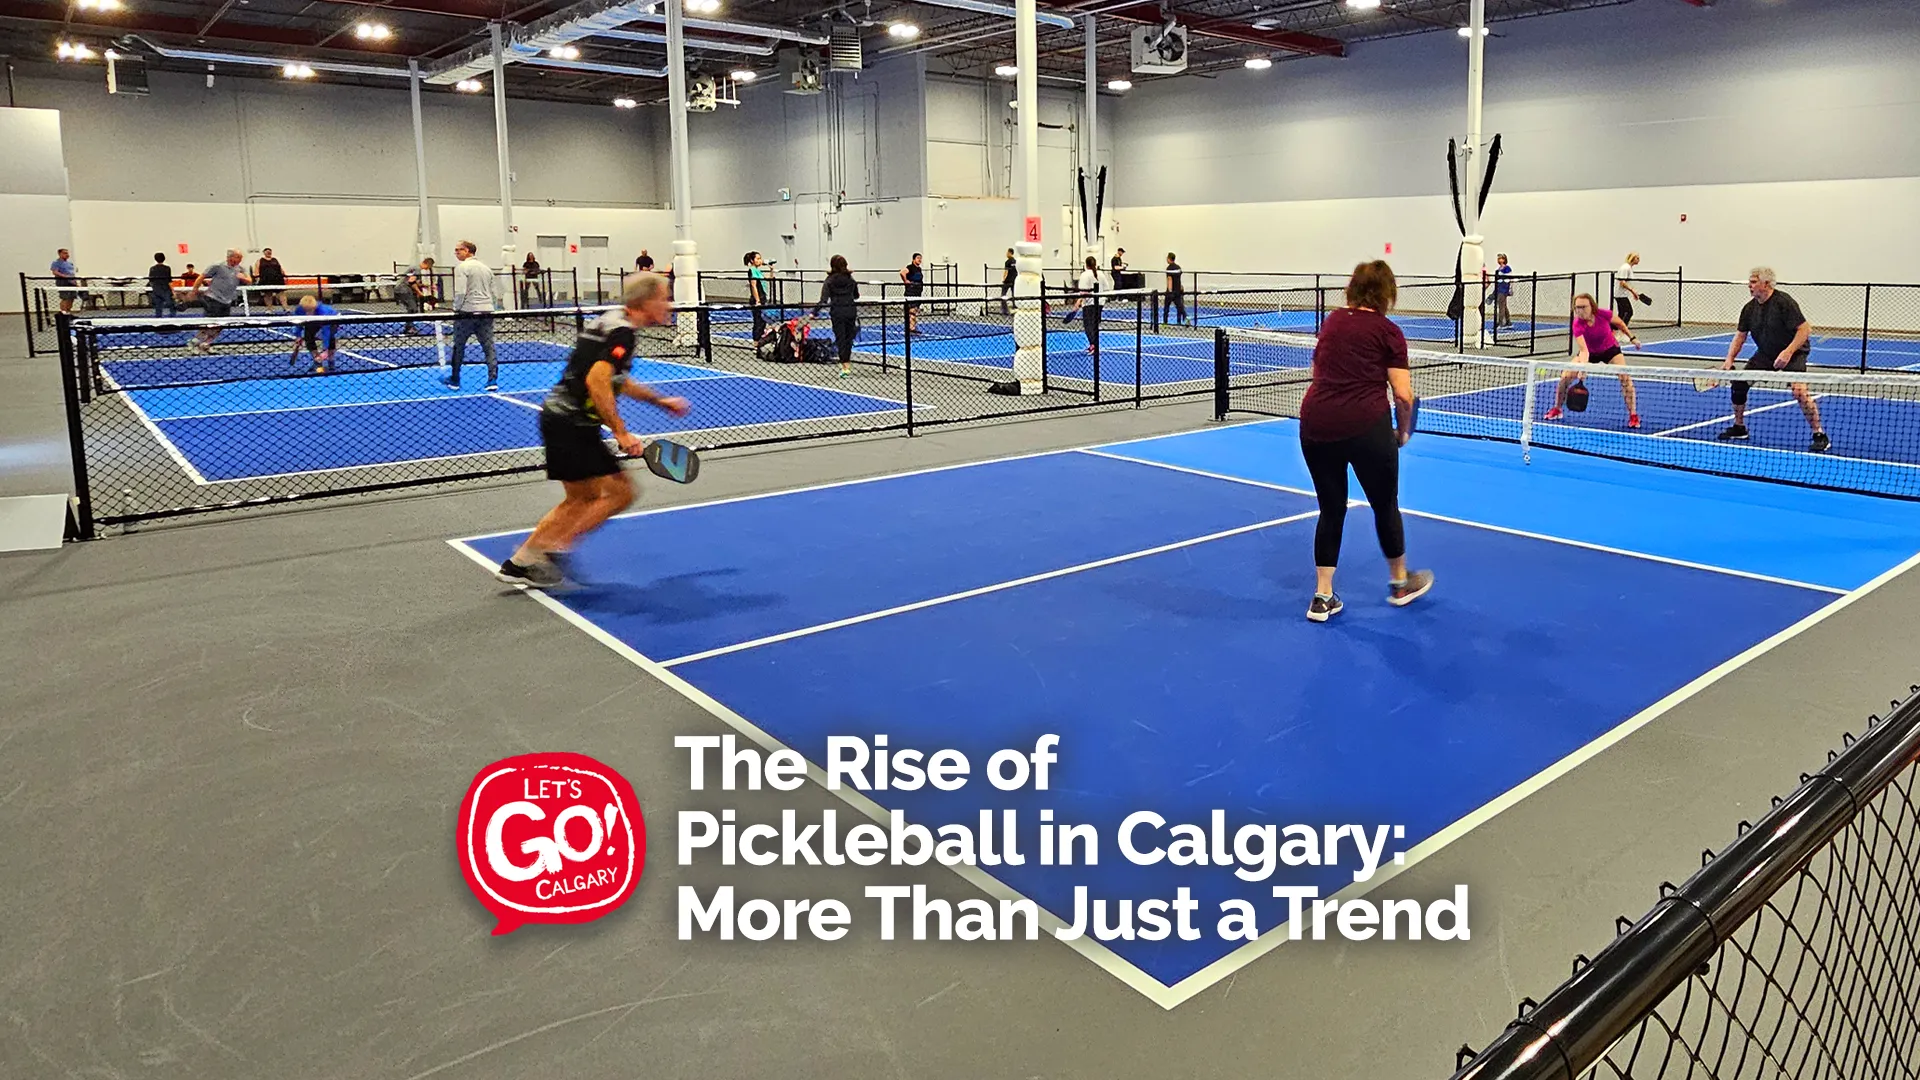 The Rise of Pickleball in Calgary: More Than Just a Trend